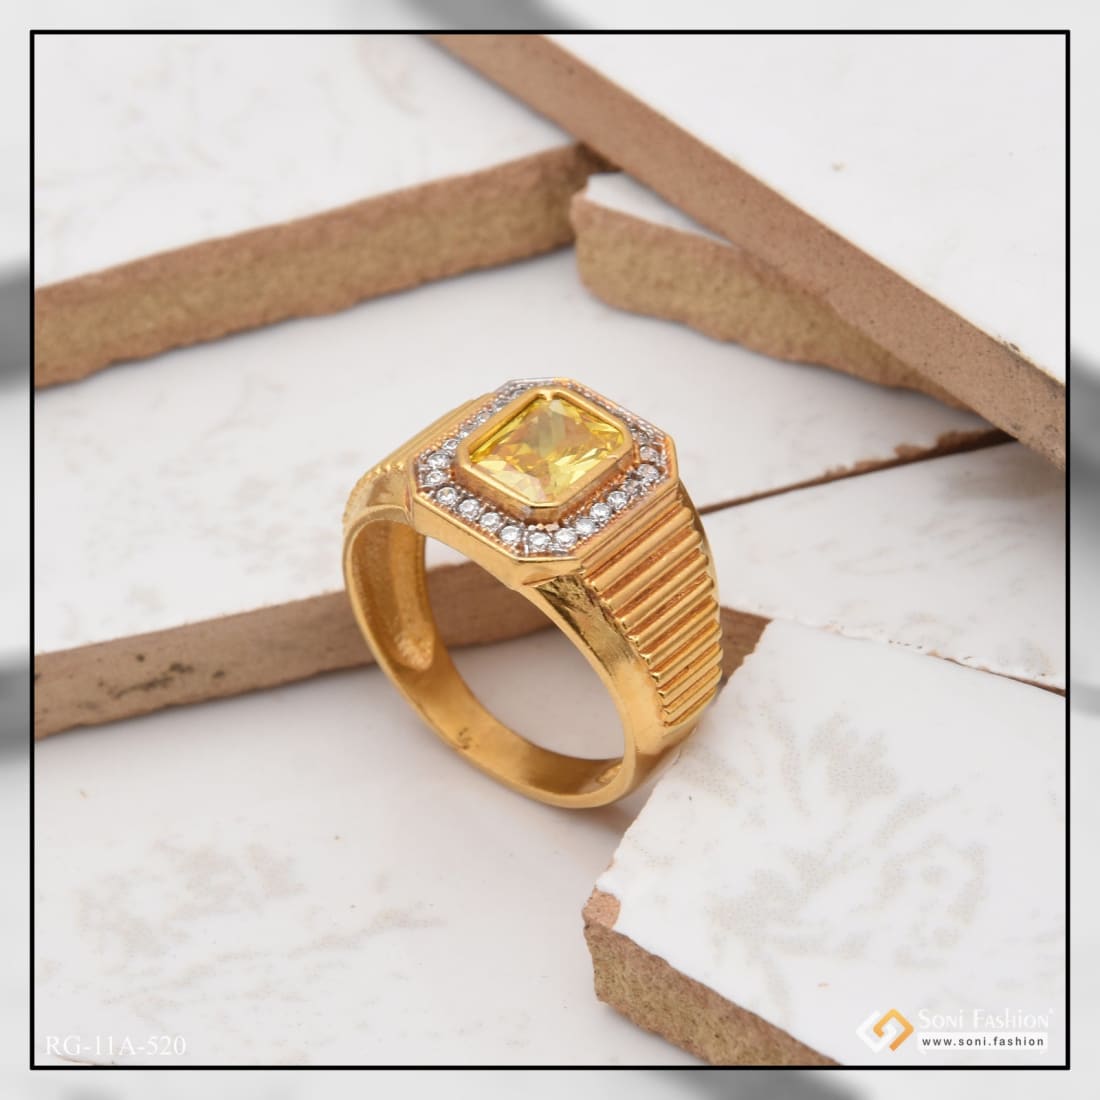 1 gram gold plated yellow stone artisanal design ring style a520 soni fashion 161